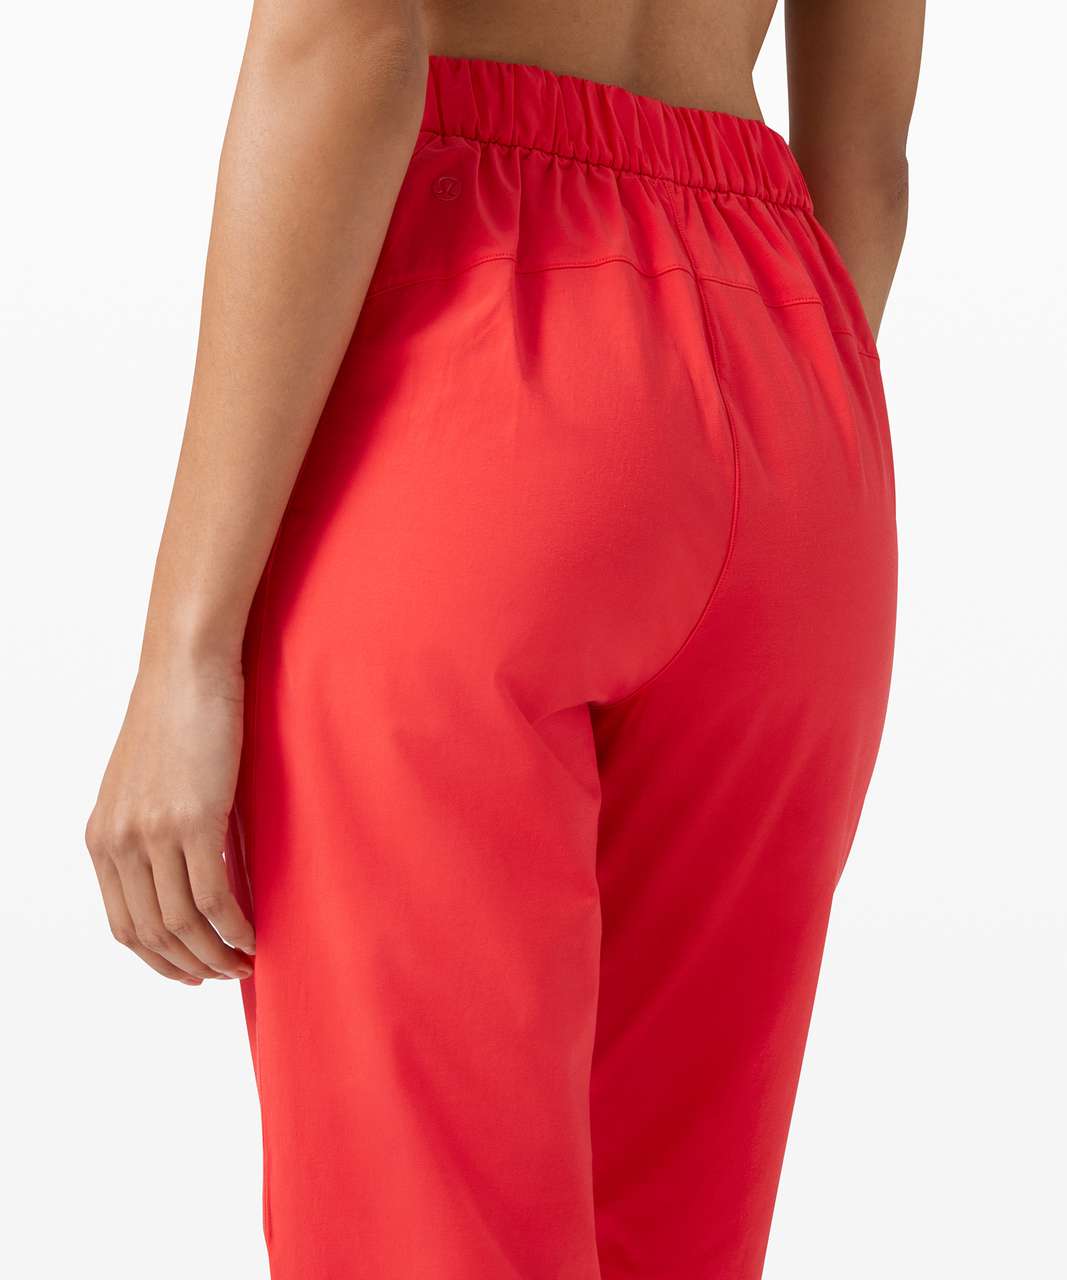 Lululemon Your True Trouser High Rise Crop - Carnation Red